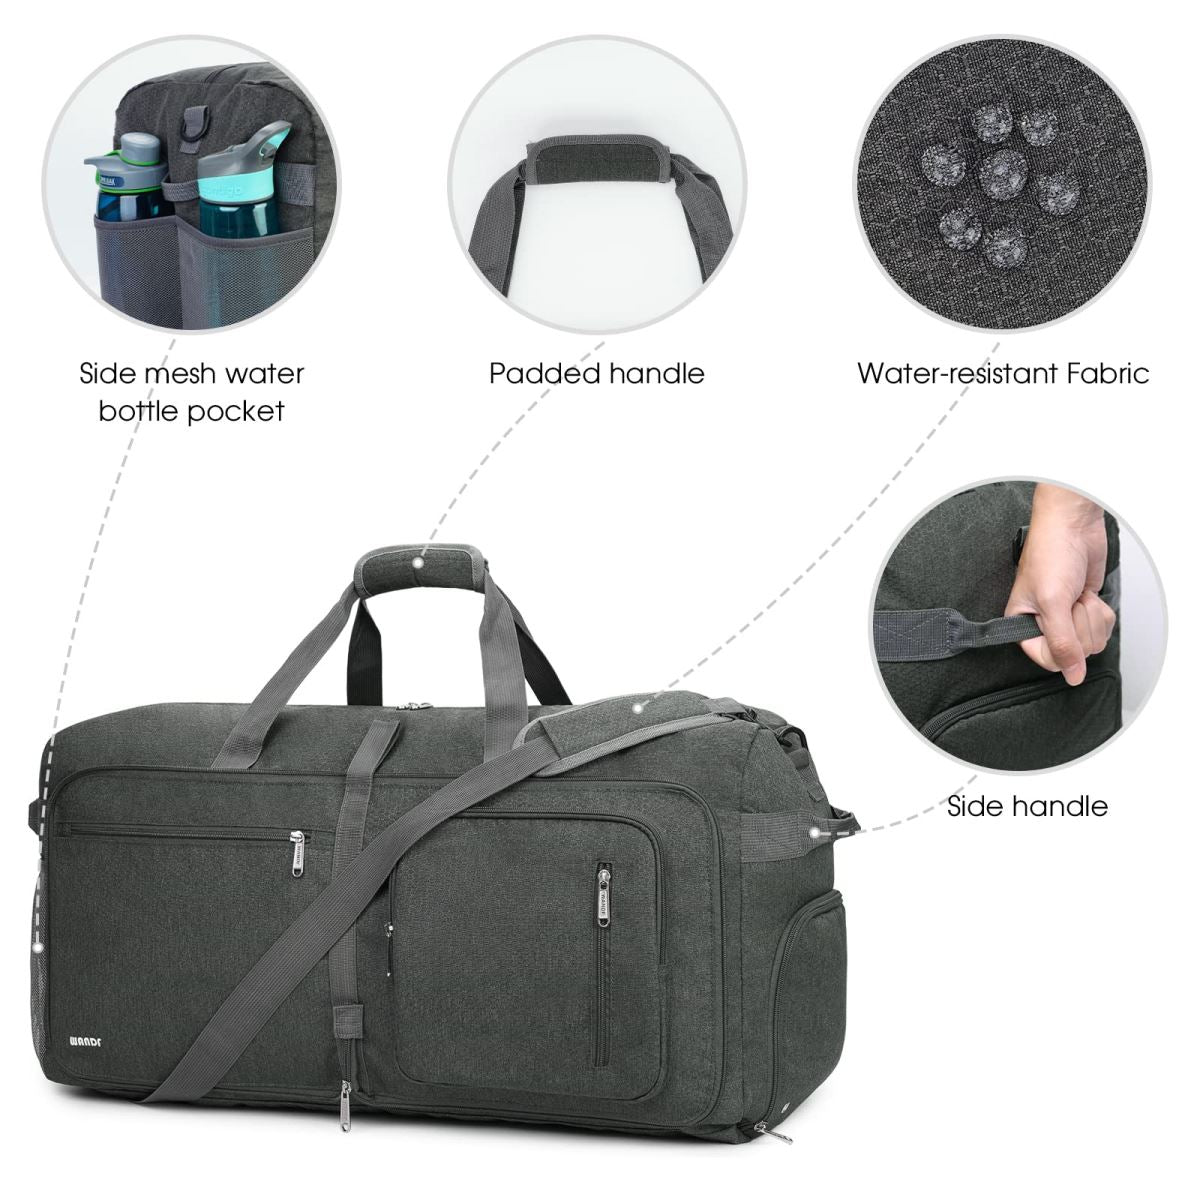 MeeTop 2022 New Foldable Dry/Wet Separation Travel Duffle Bag for Women Carry on with Shoe Compartment Luggage Sleeve, Large Capacity Folding Travel